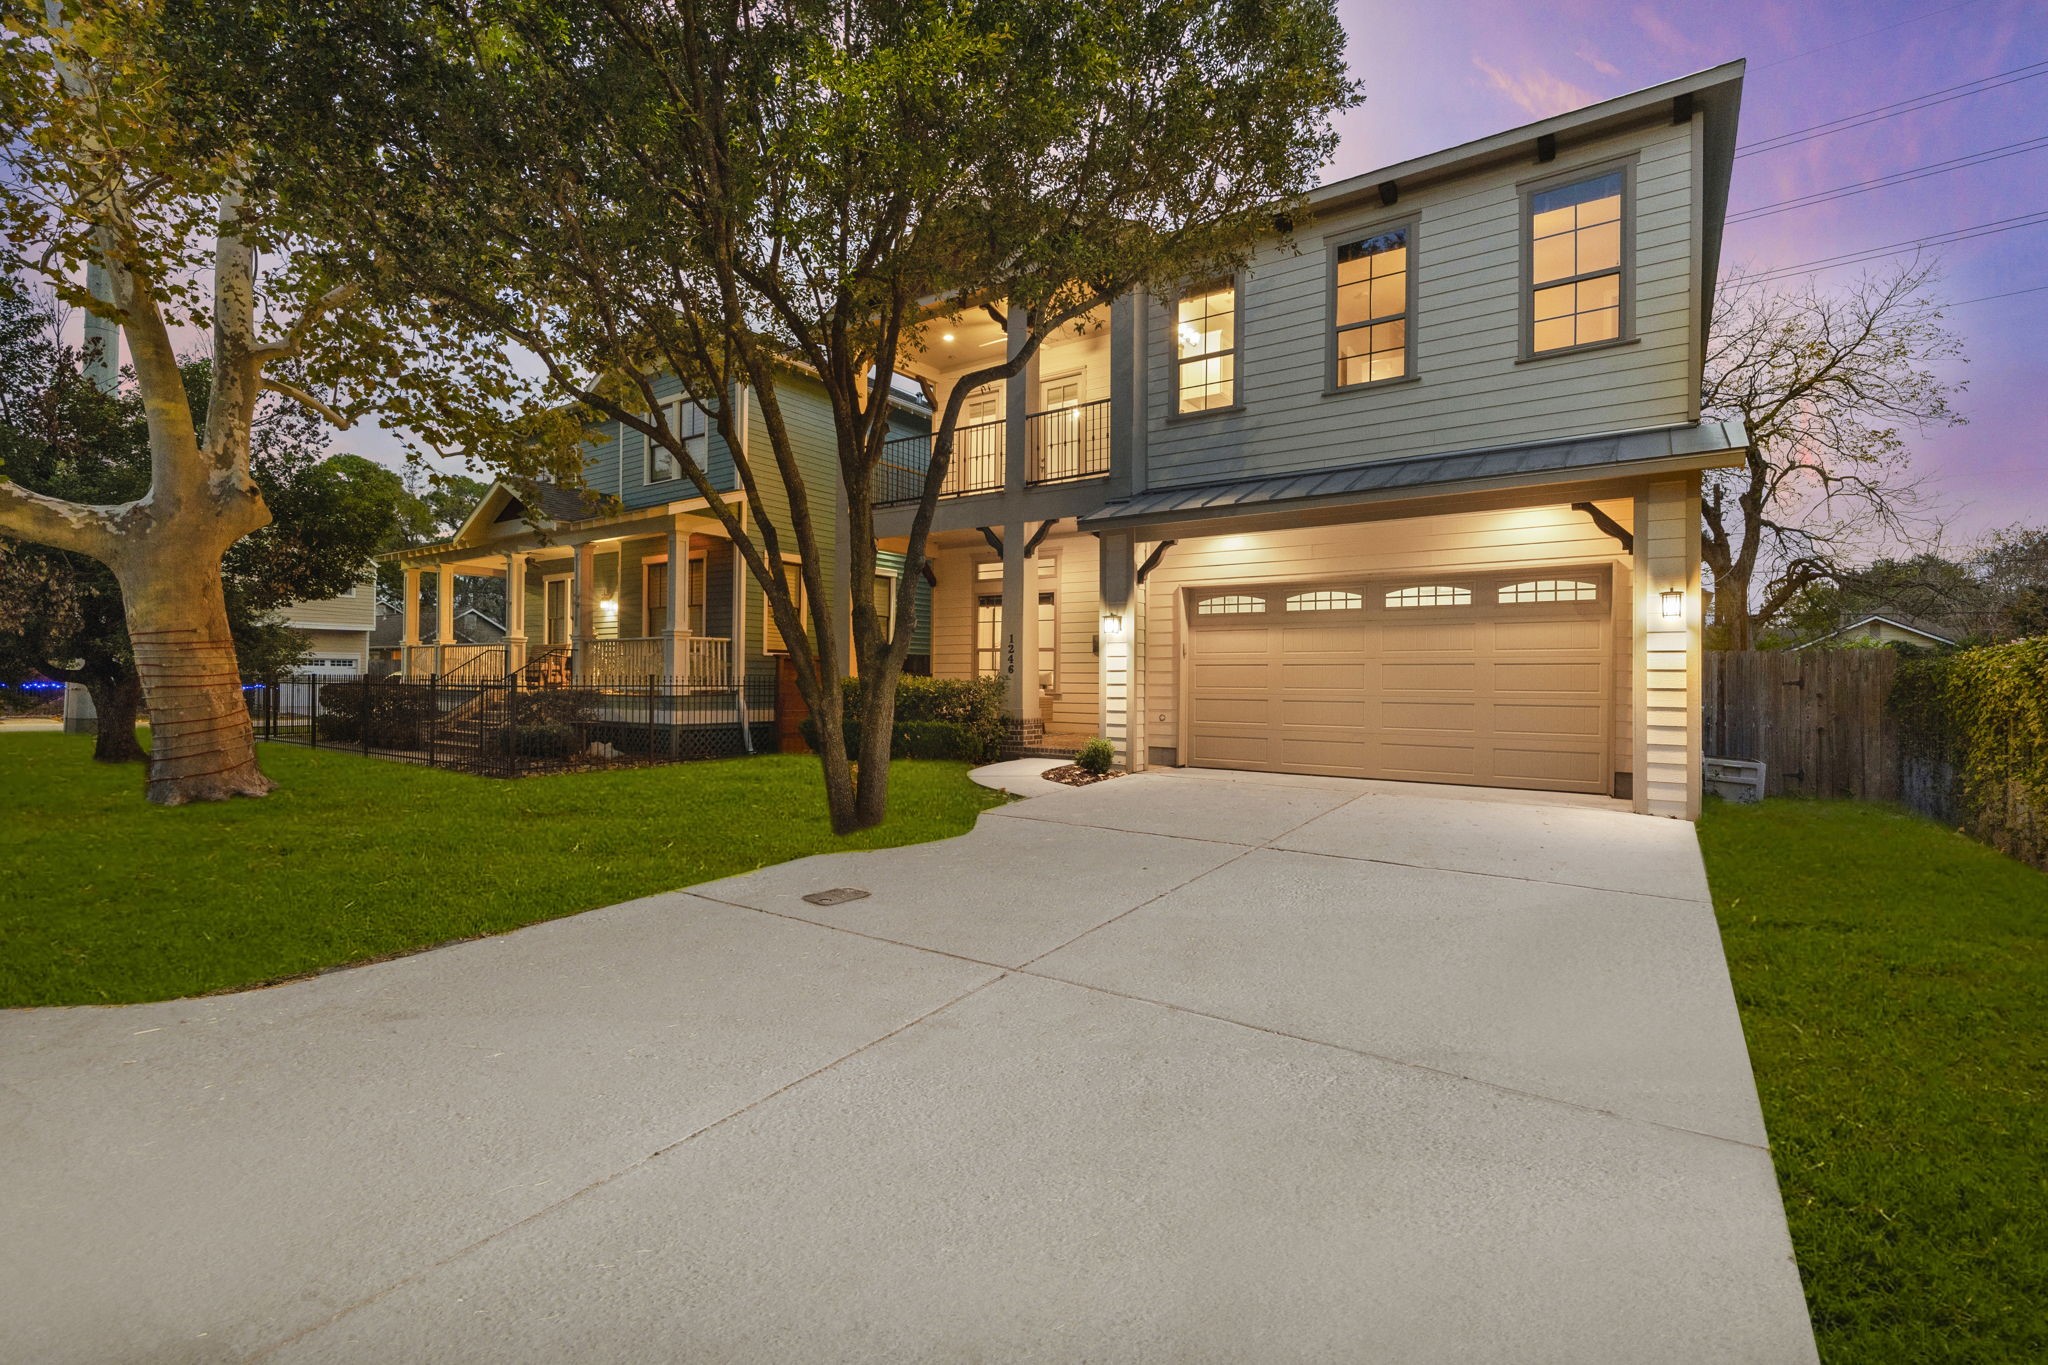 Find abundant parking space courtesy of the double-wide driveway and two-car garage, complete with a recently upgraded door spring (2023).